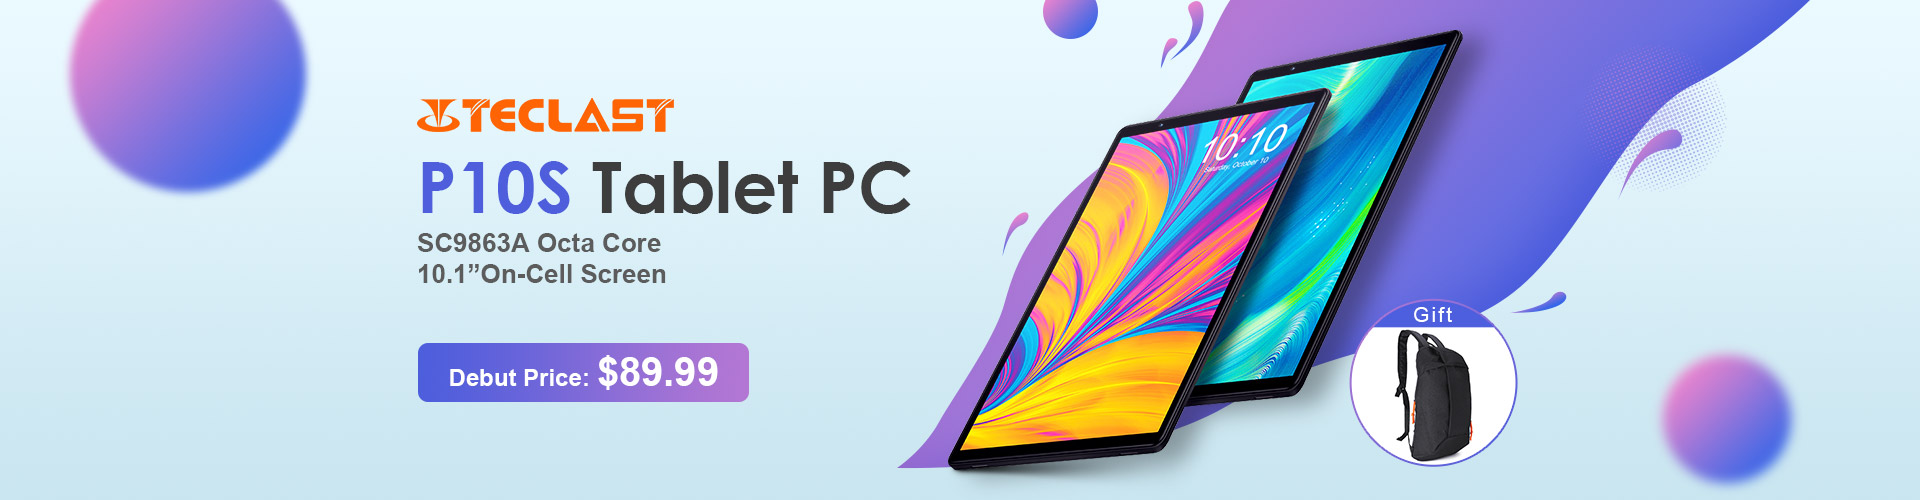 $89.99 For Teclast P10s With Free Gift